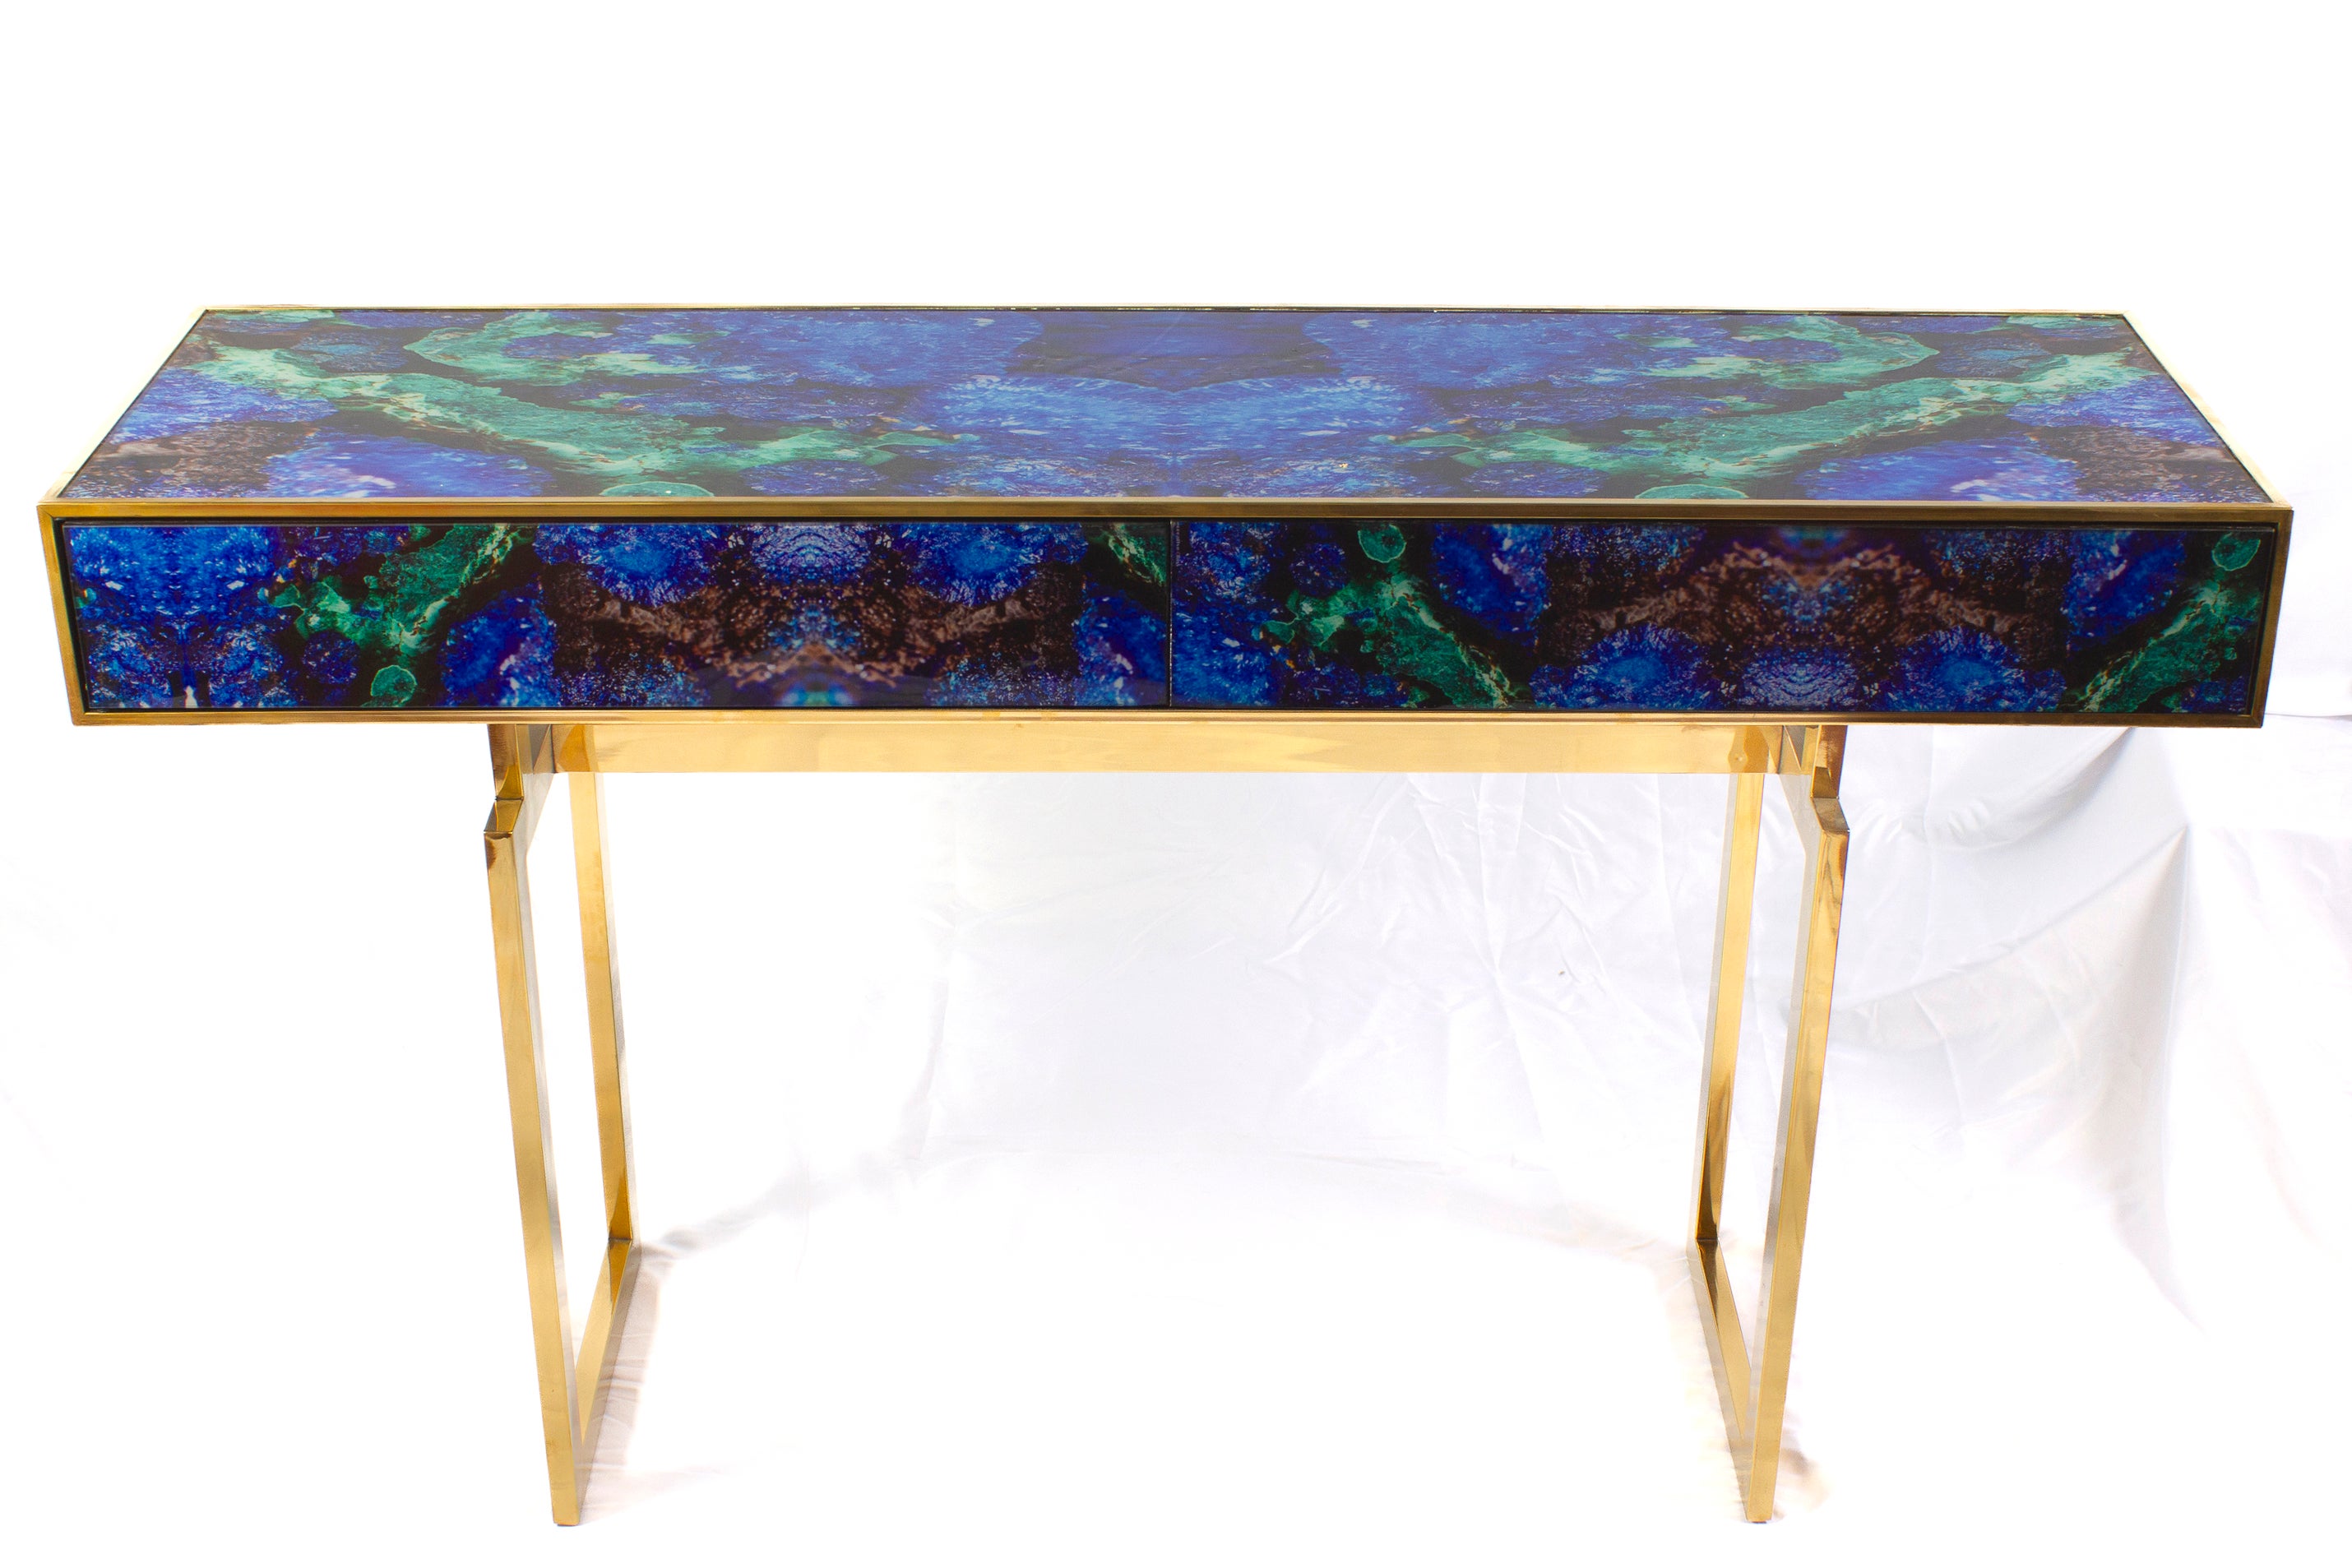 Striking brass frame and hand-cut Lapis lazuli imitation Murano glass Console  table with two drawers, raised on special brass legs. 
Handmade by a master artisan.
Price is for one item. 
 Available also  a pair .